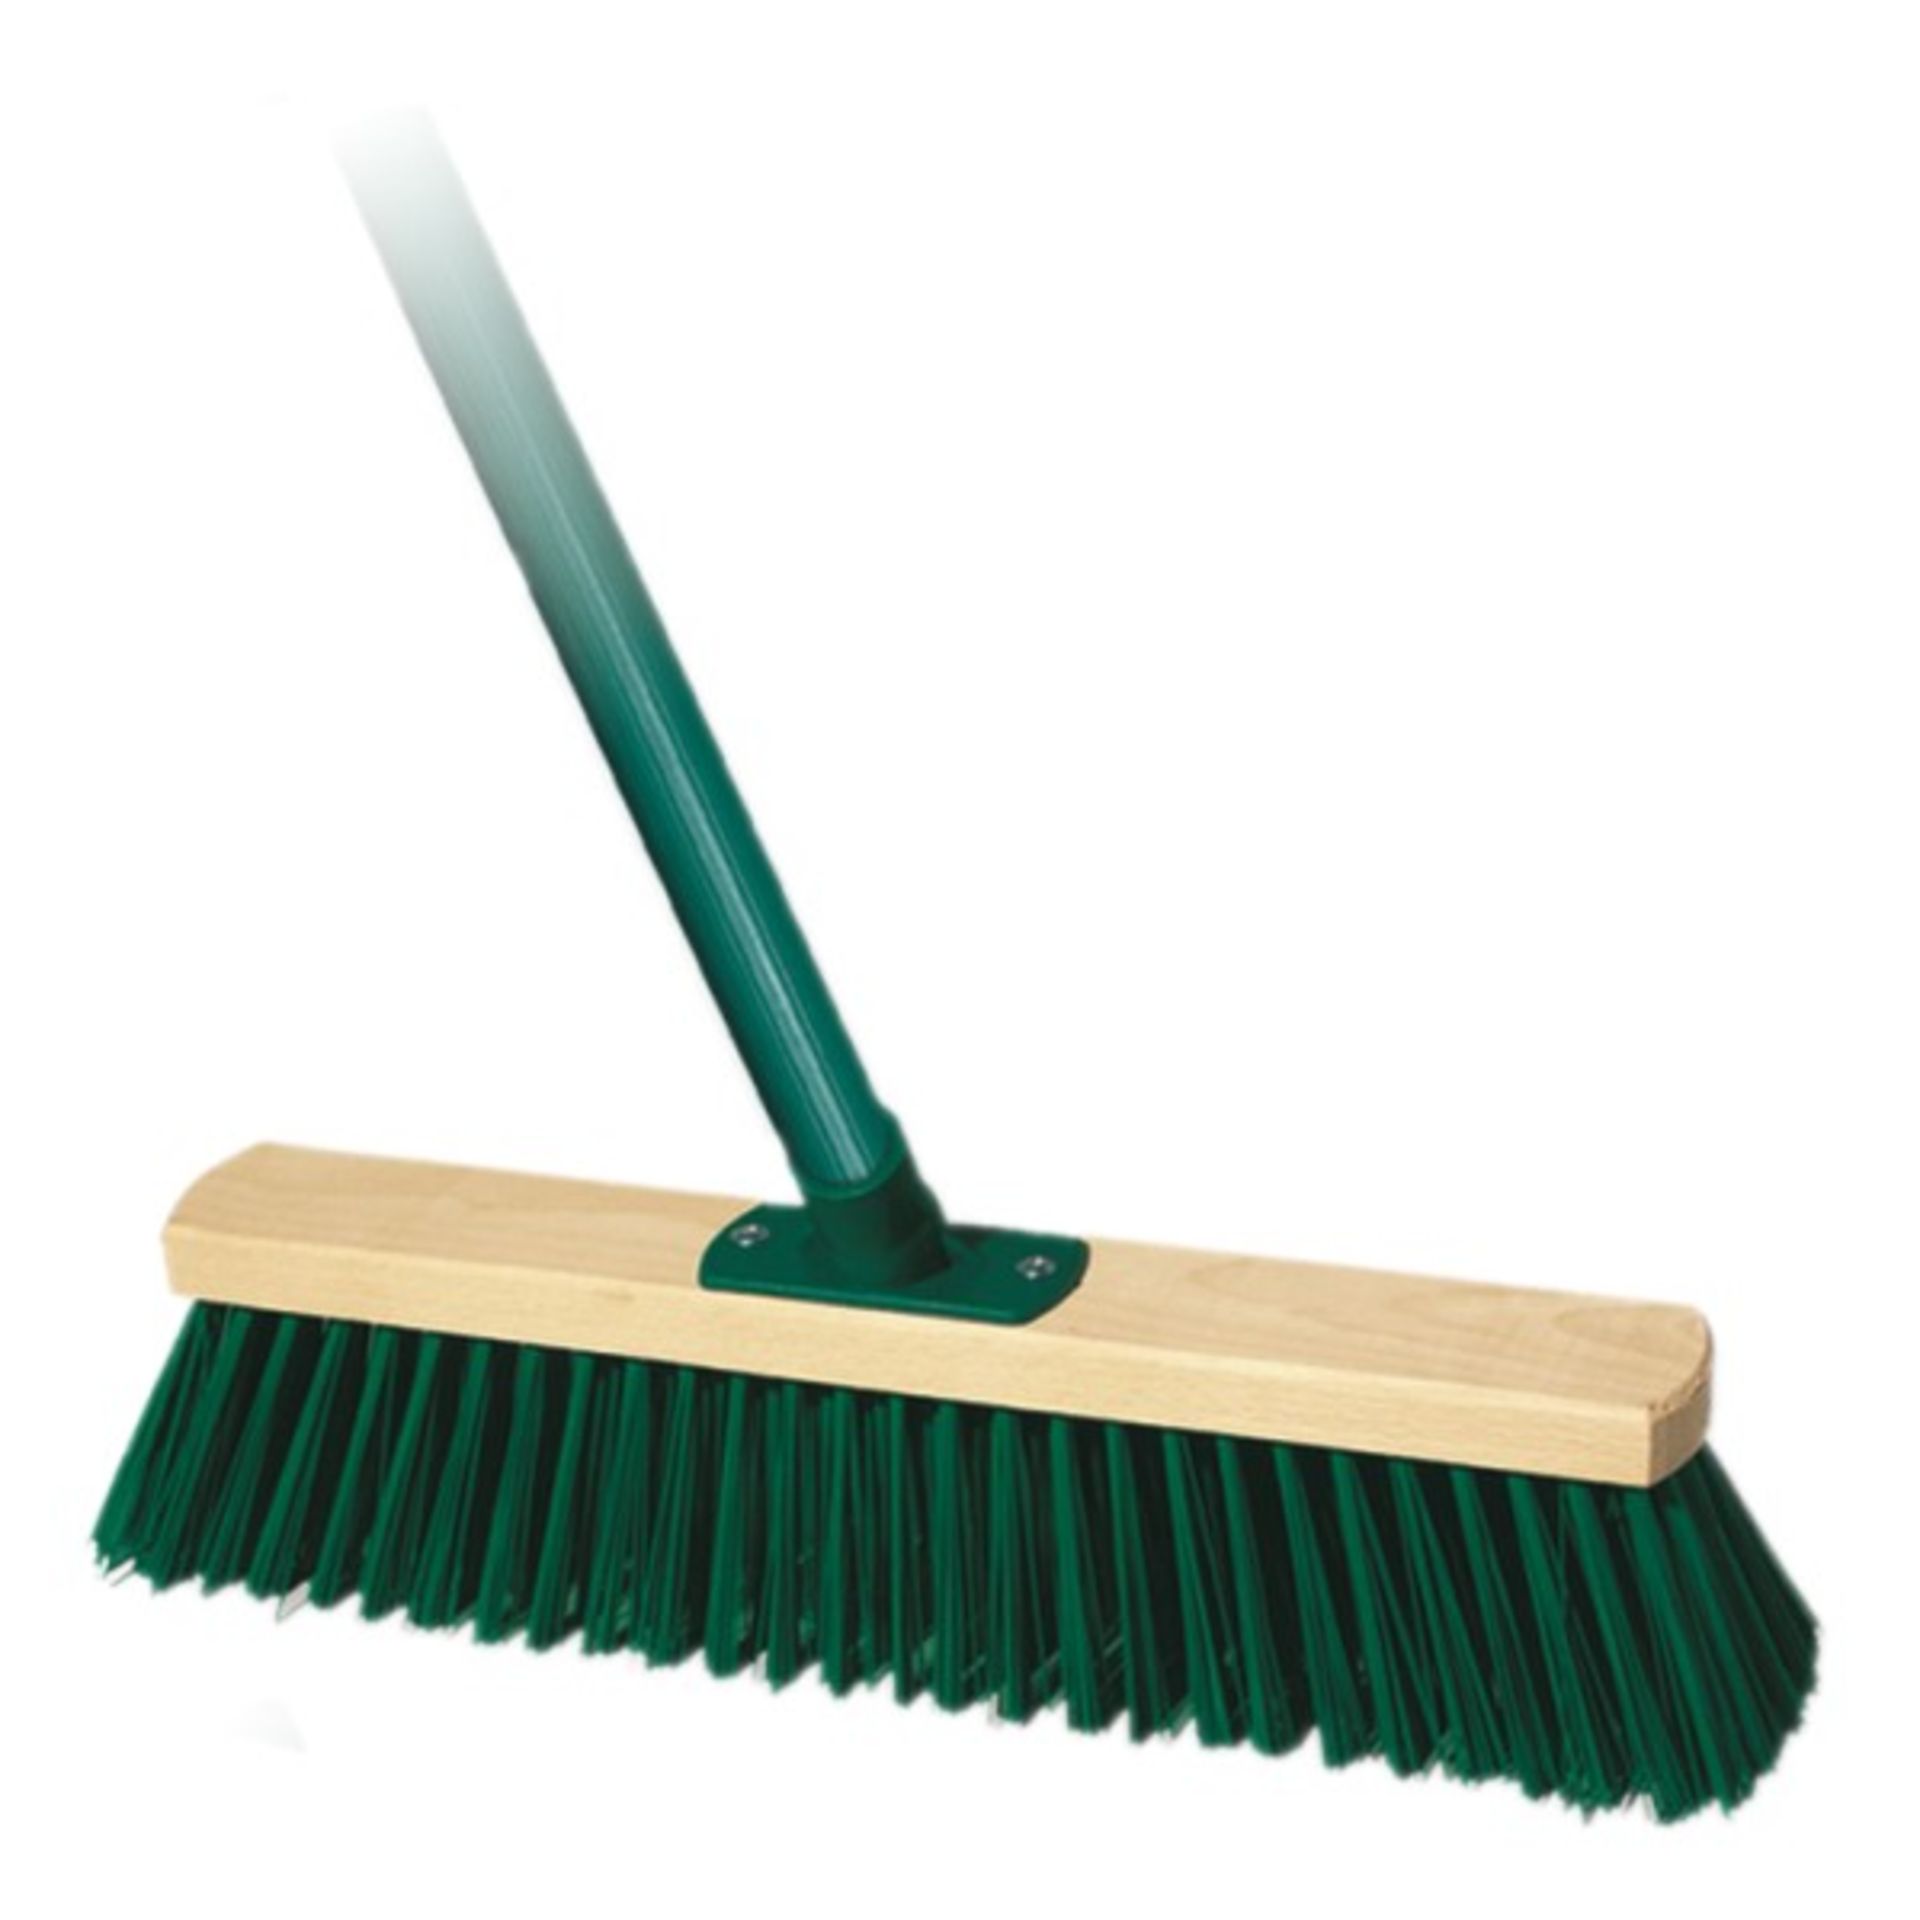 V Brand New 40CM Wooden Street Broom With Handle X 2 YOUR BID PRICE TO BE MULTIPLIED BY TWO